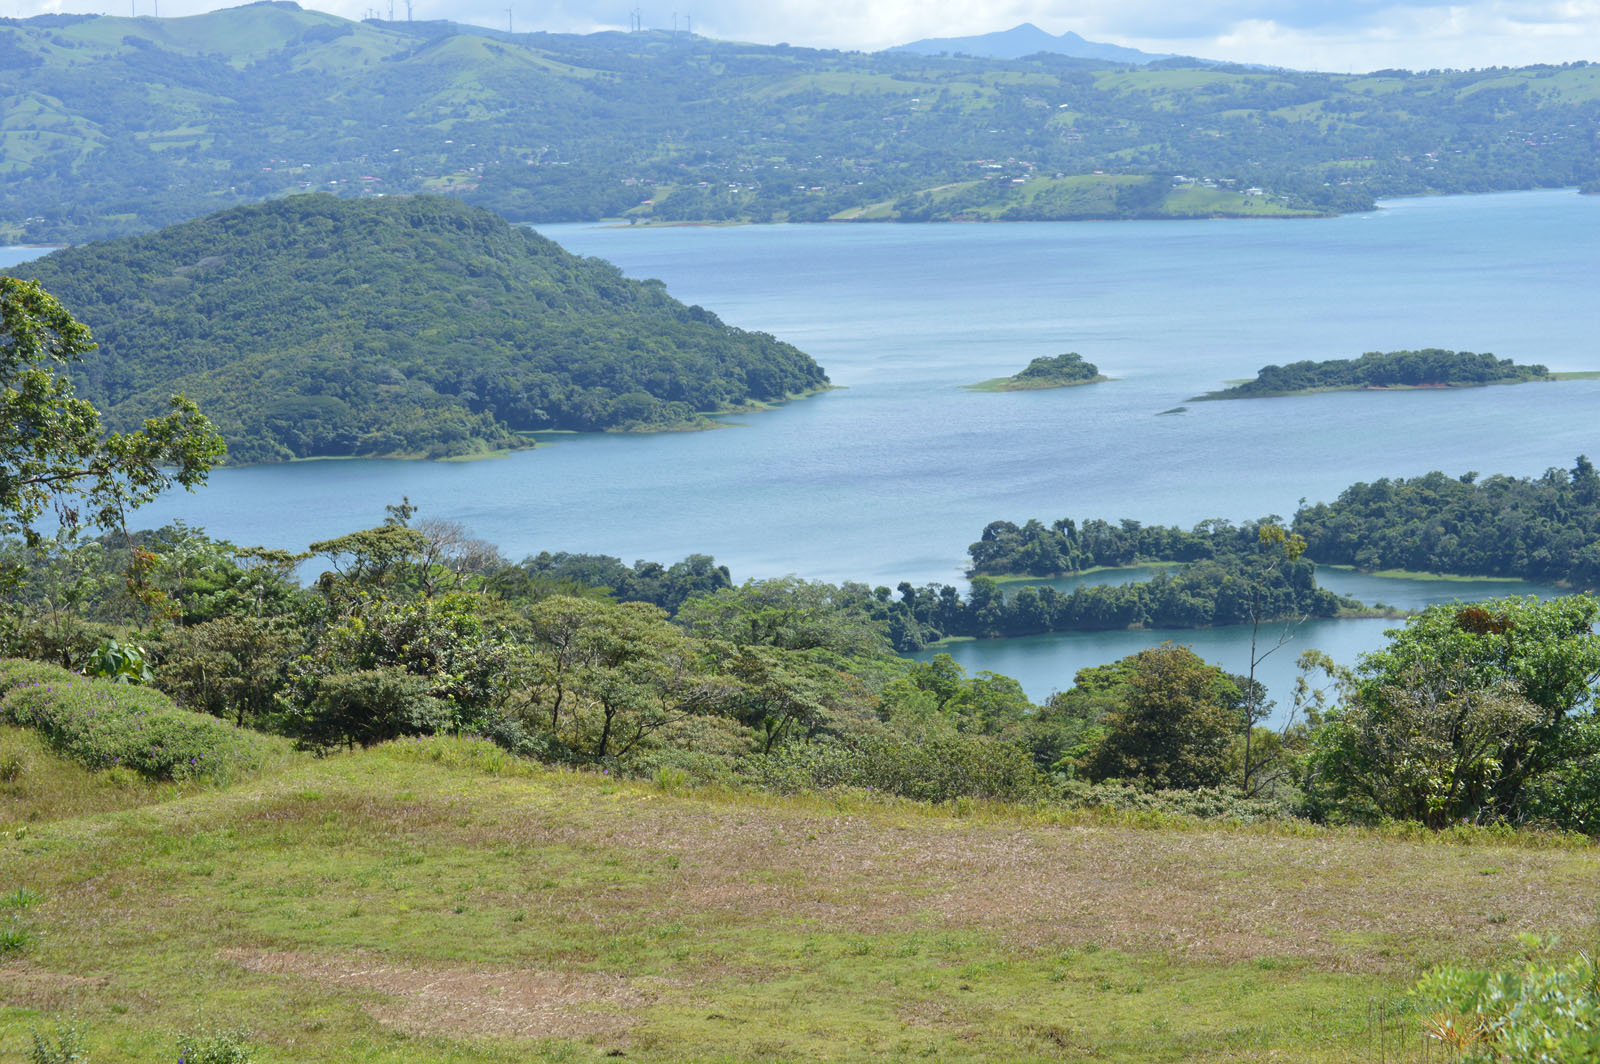 Choices of 10 Lands for Building in an exclusive community with Exceptional Views of Lake Arenal